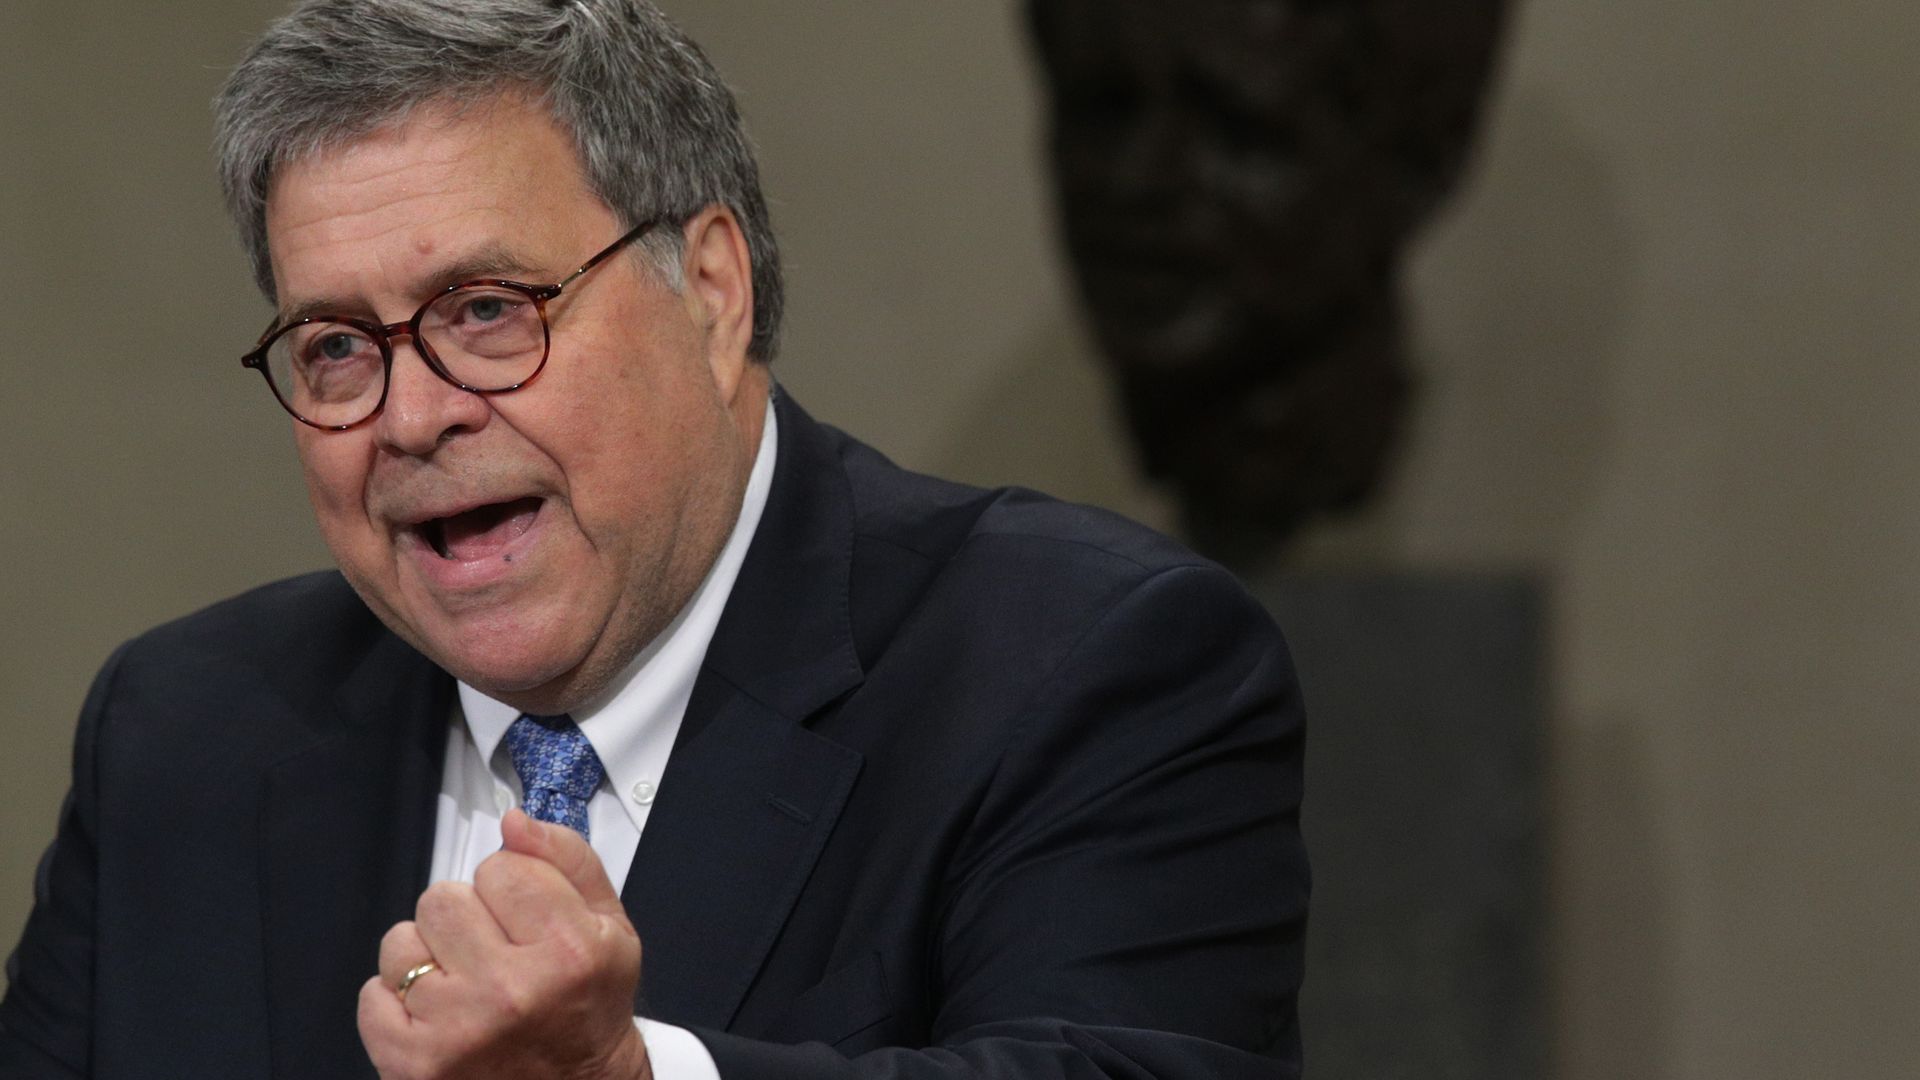  Attorney General William Barr speaks during a "Combating Anti-Semitism Summit" at the Justice Department July 15, 2019 in Washington, DC.